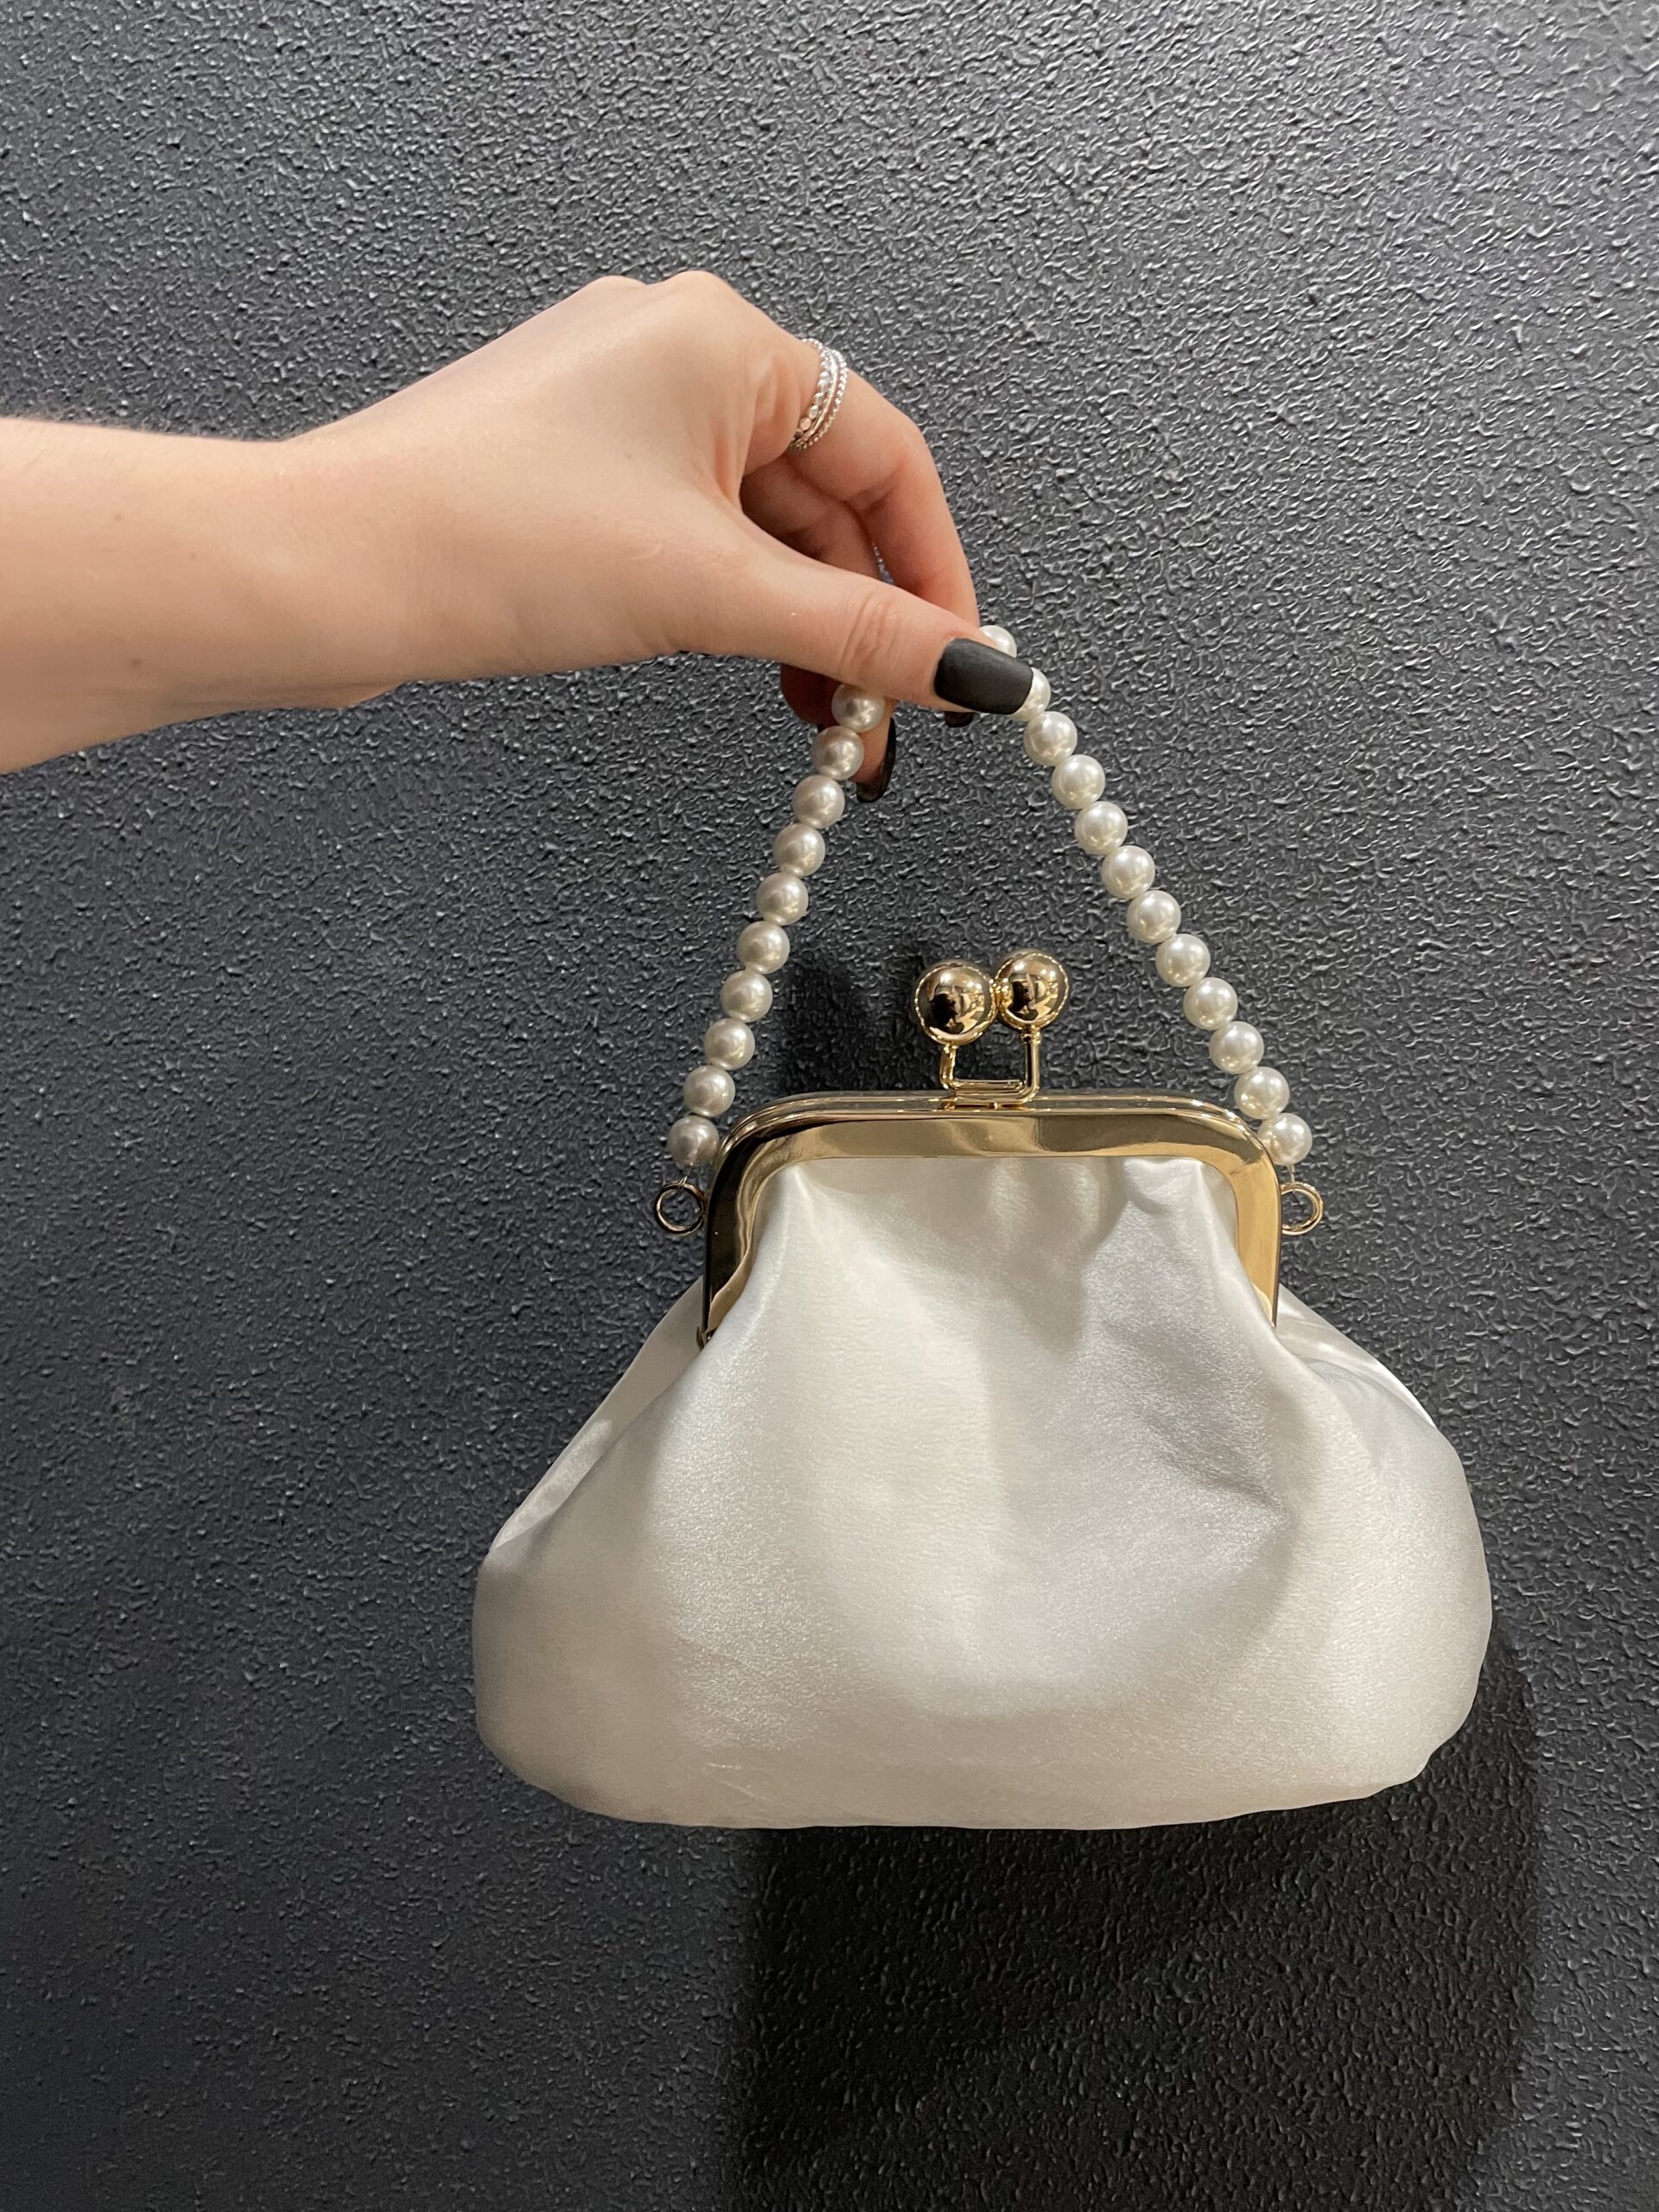 Basra - a satin clutch with a pearl strap and a gold kiss-lock.